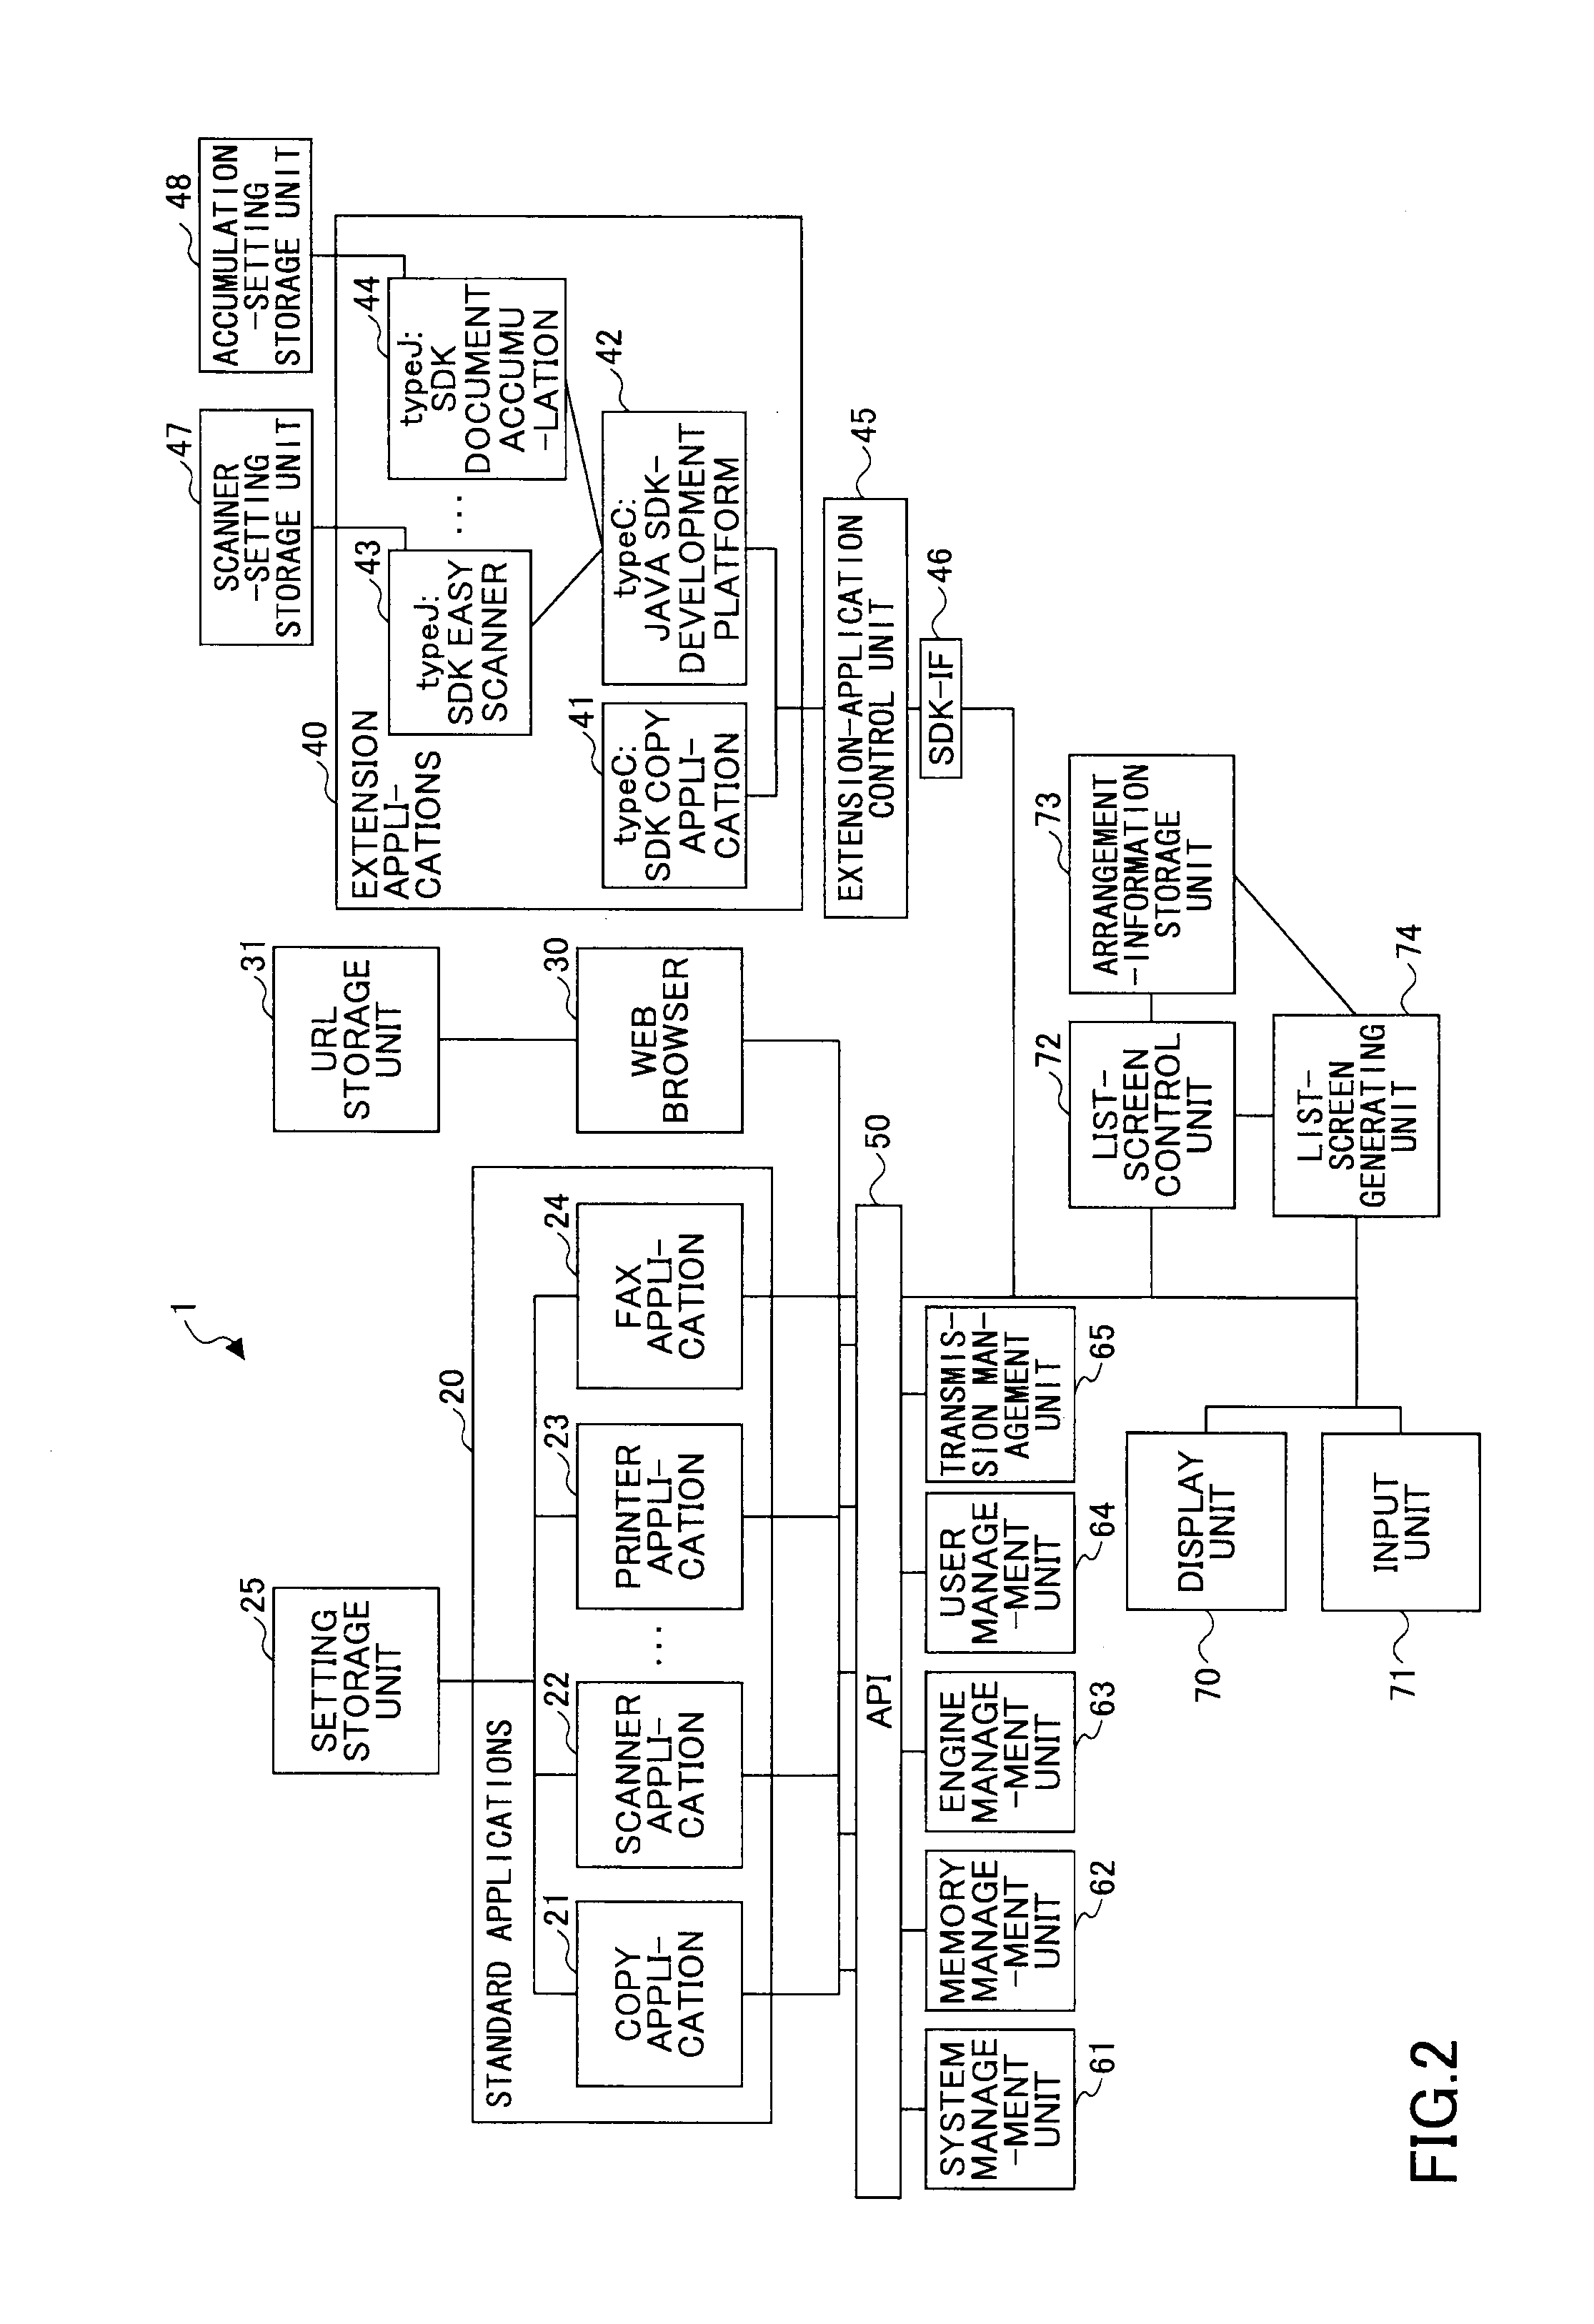 Image forming apparatus and screen control method that displays a list screen